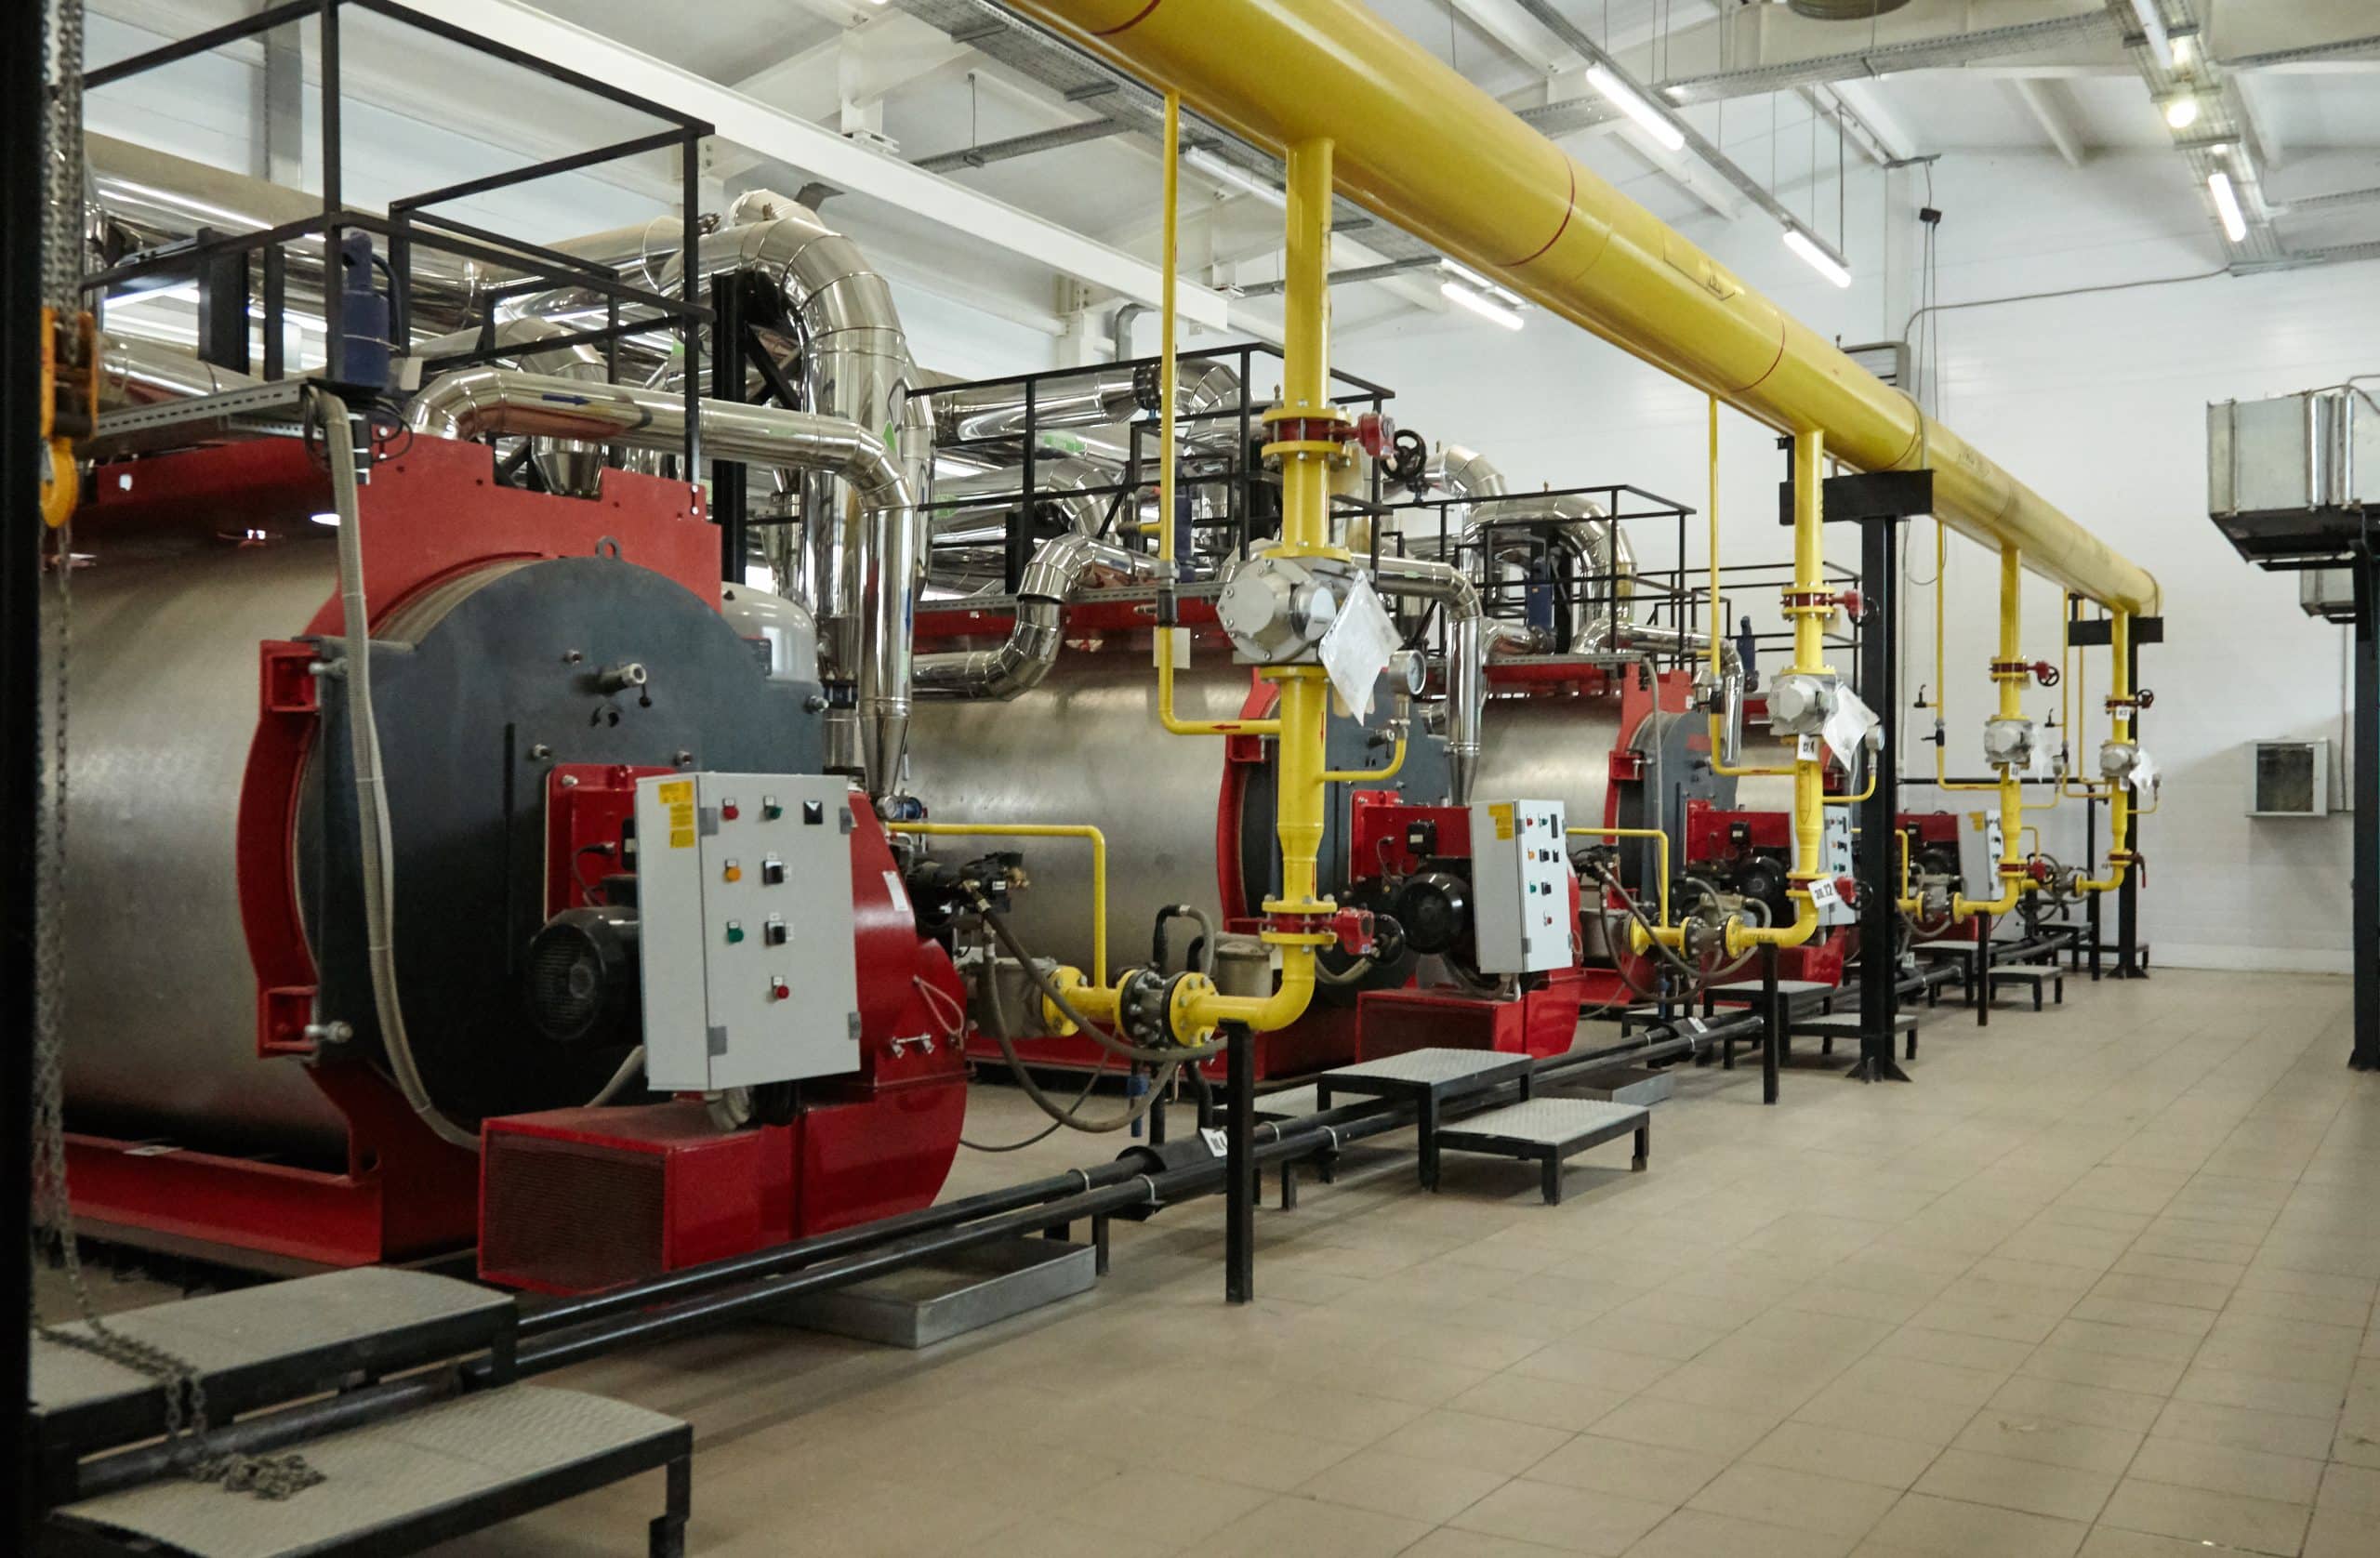 Heating equipment in boiler room for planning transition to carbon neutrality